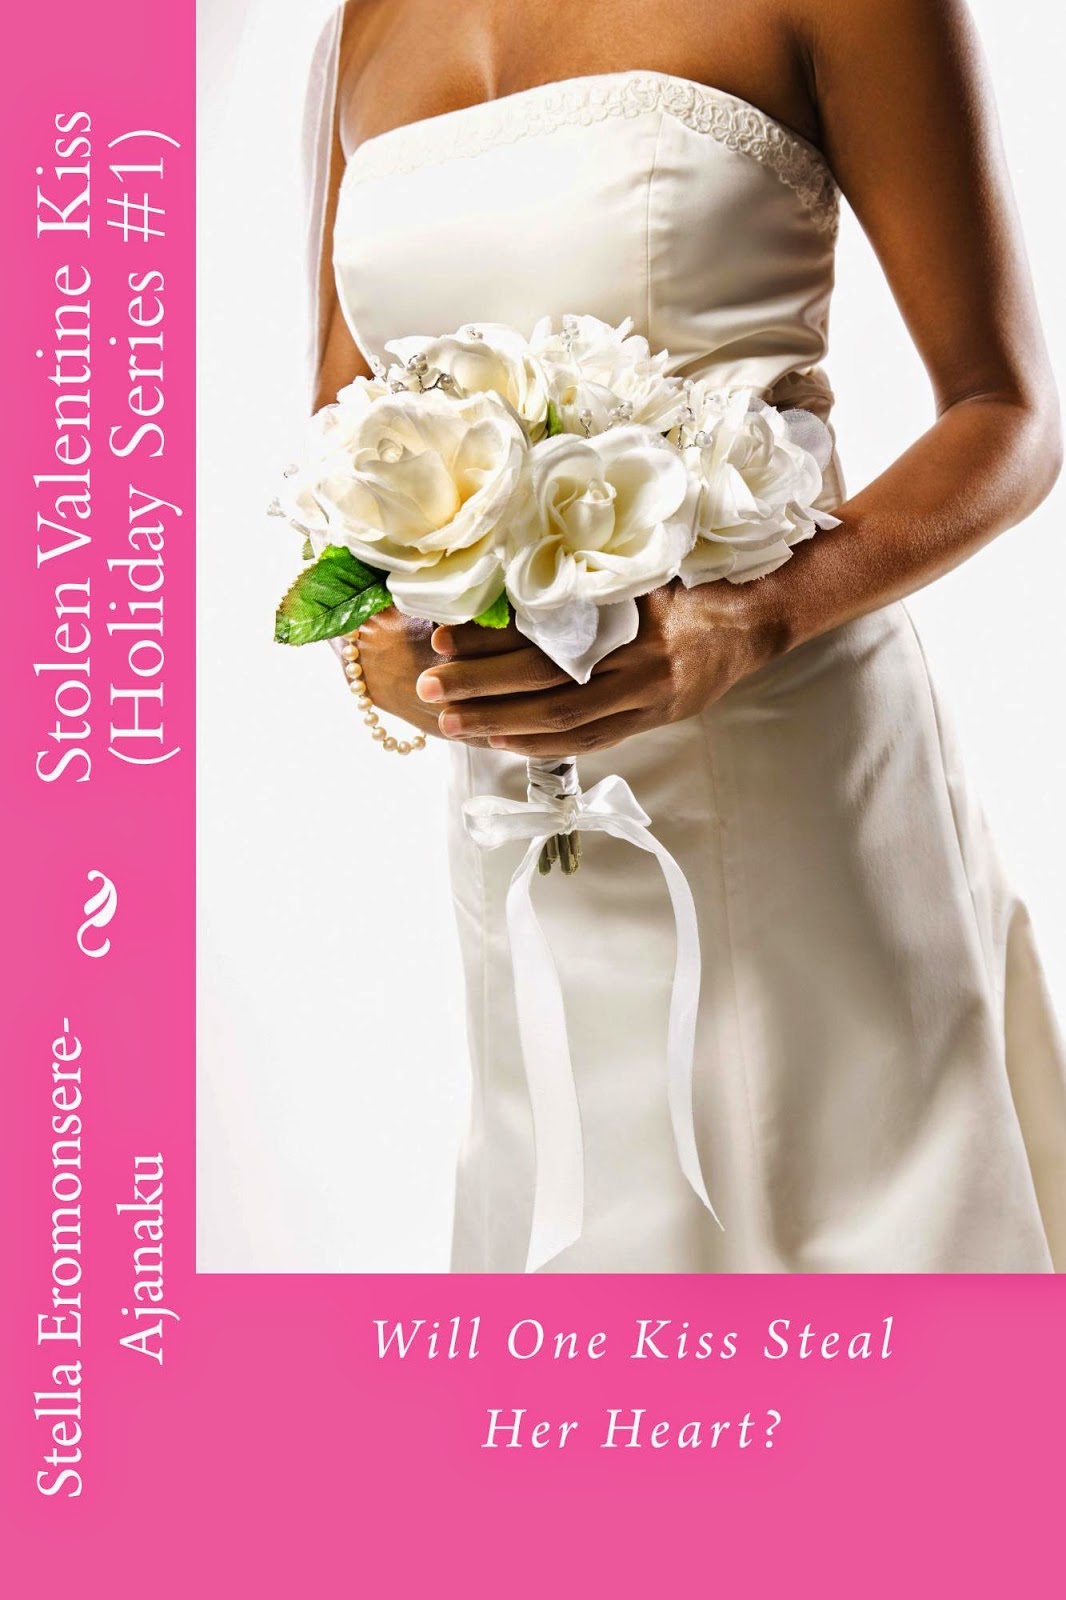 Flirty And Feisty Romance Blog Spice Up Your Relationships Sexy Excerpt